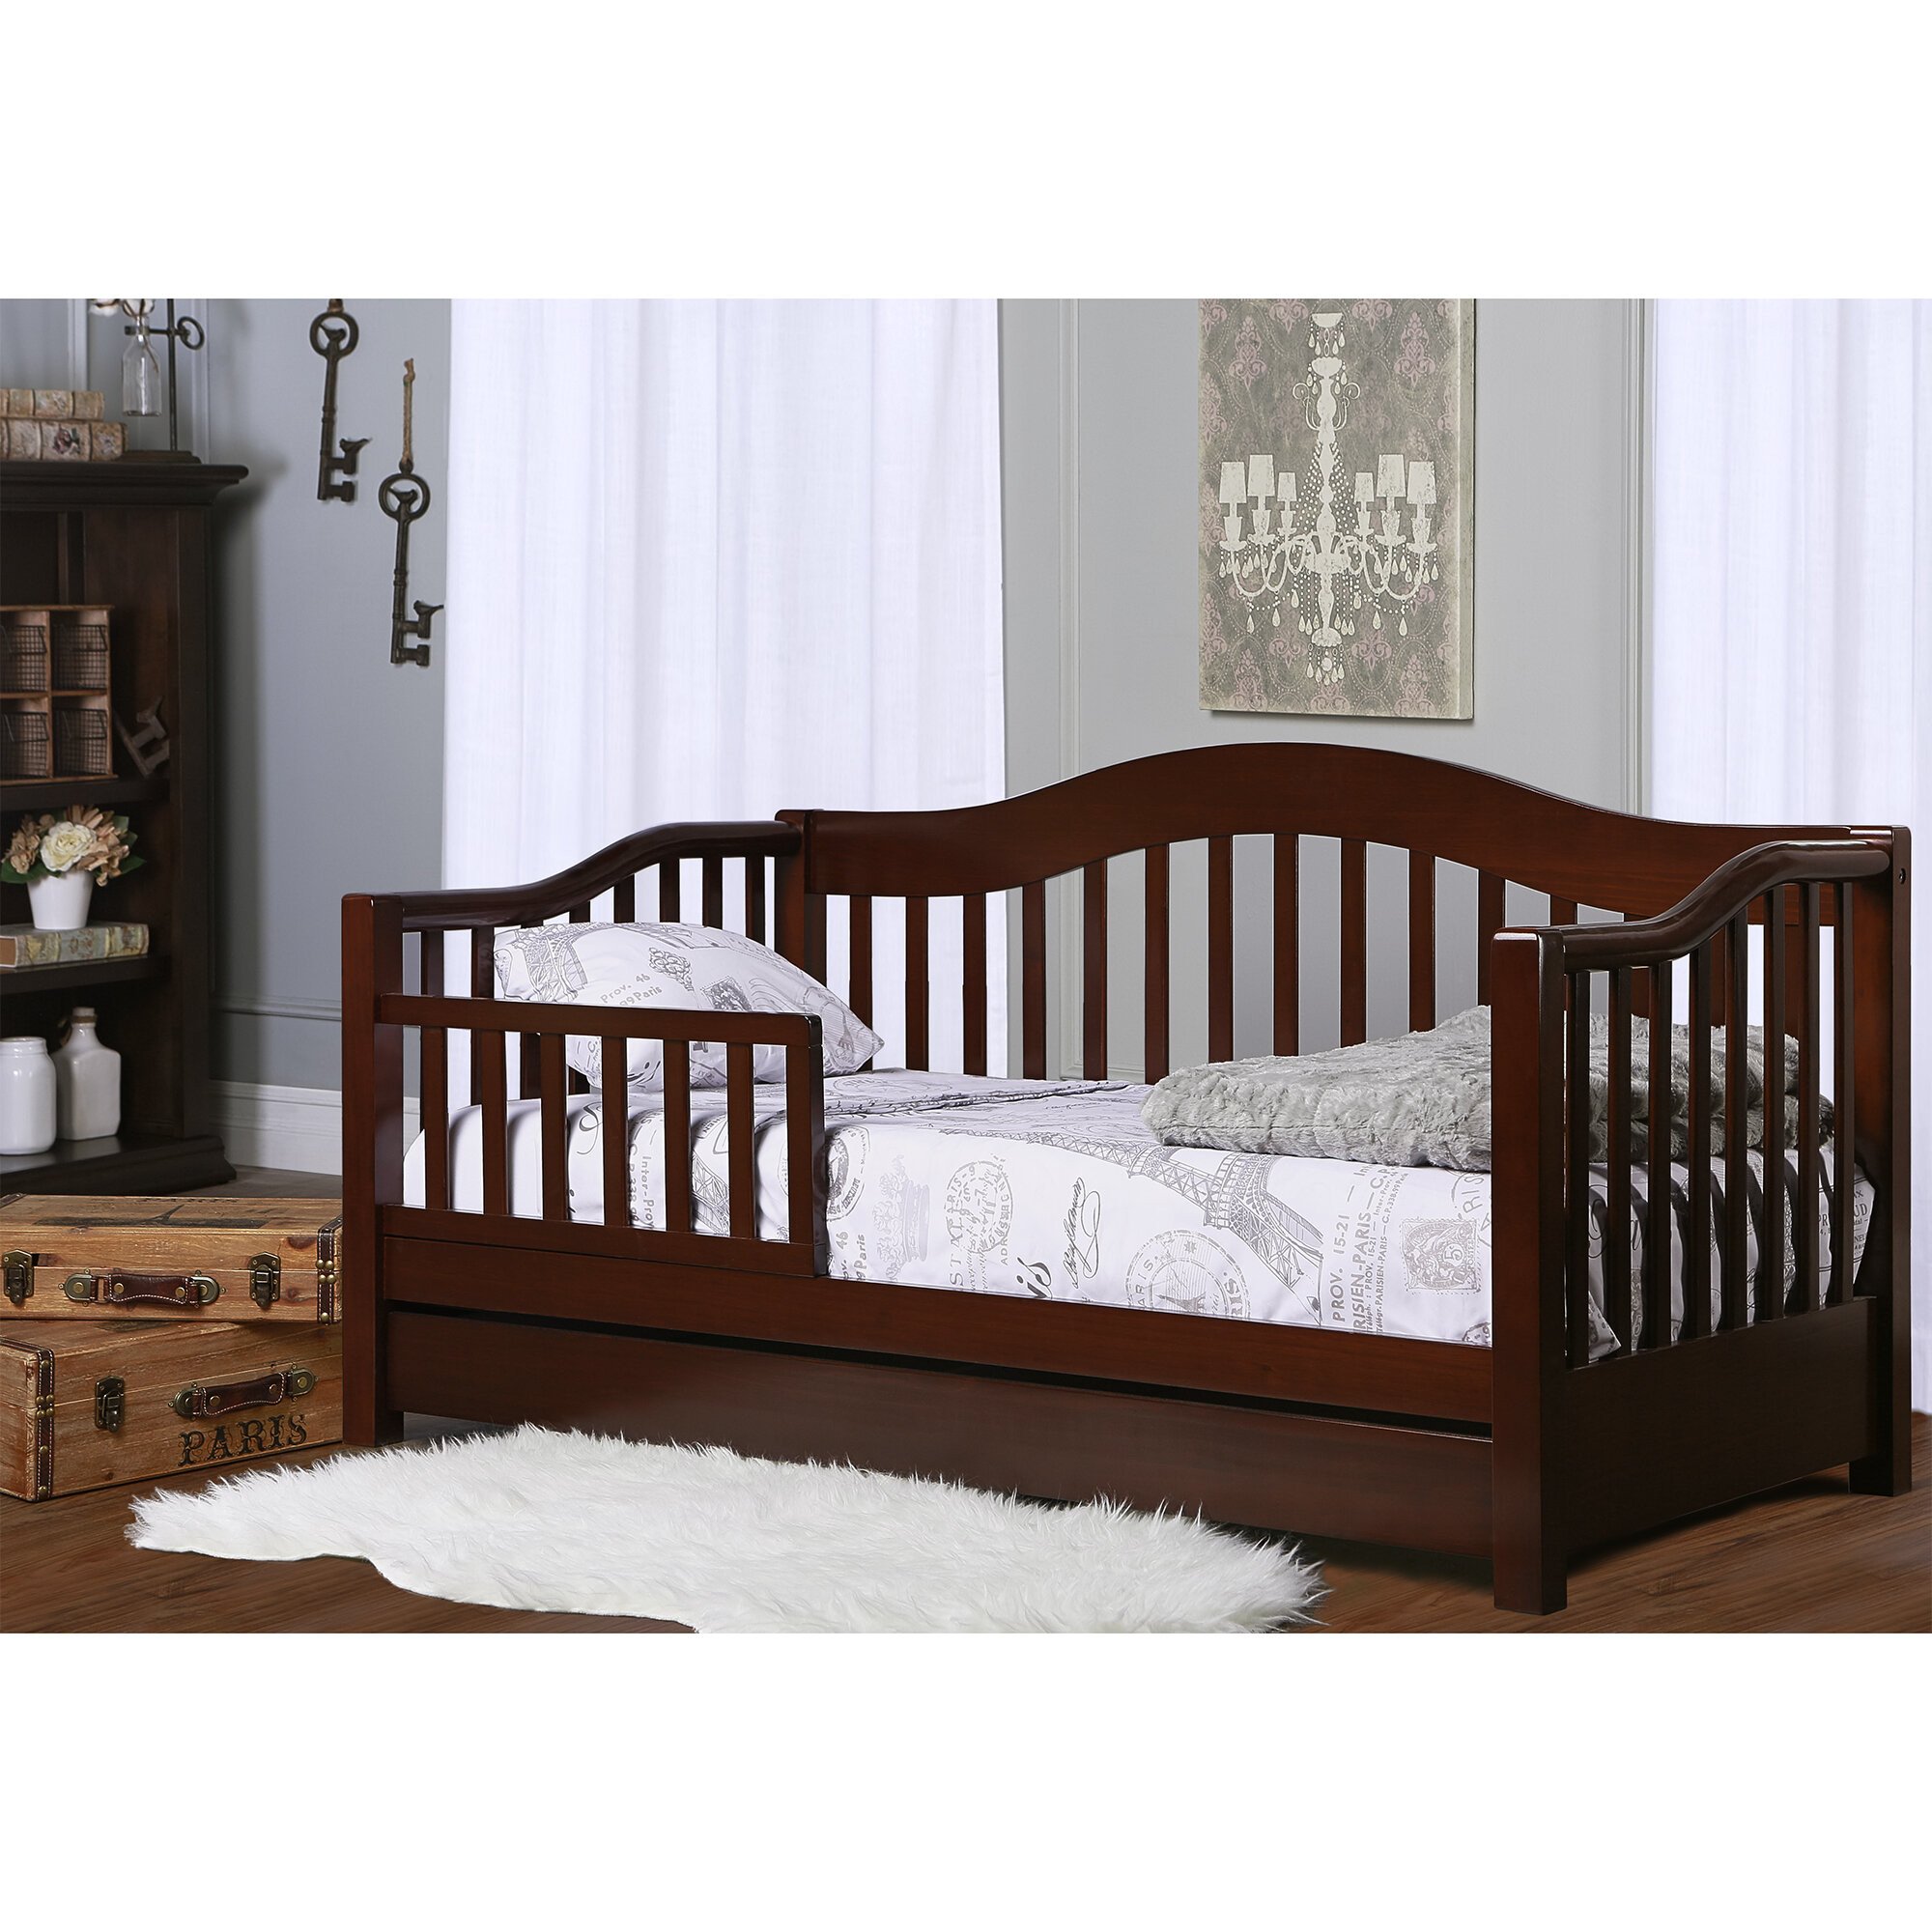 Rooms to Go Bedroom Furniture Sale Fresh Clarkson toddler Bed